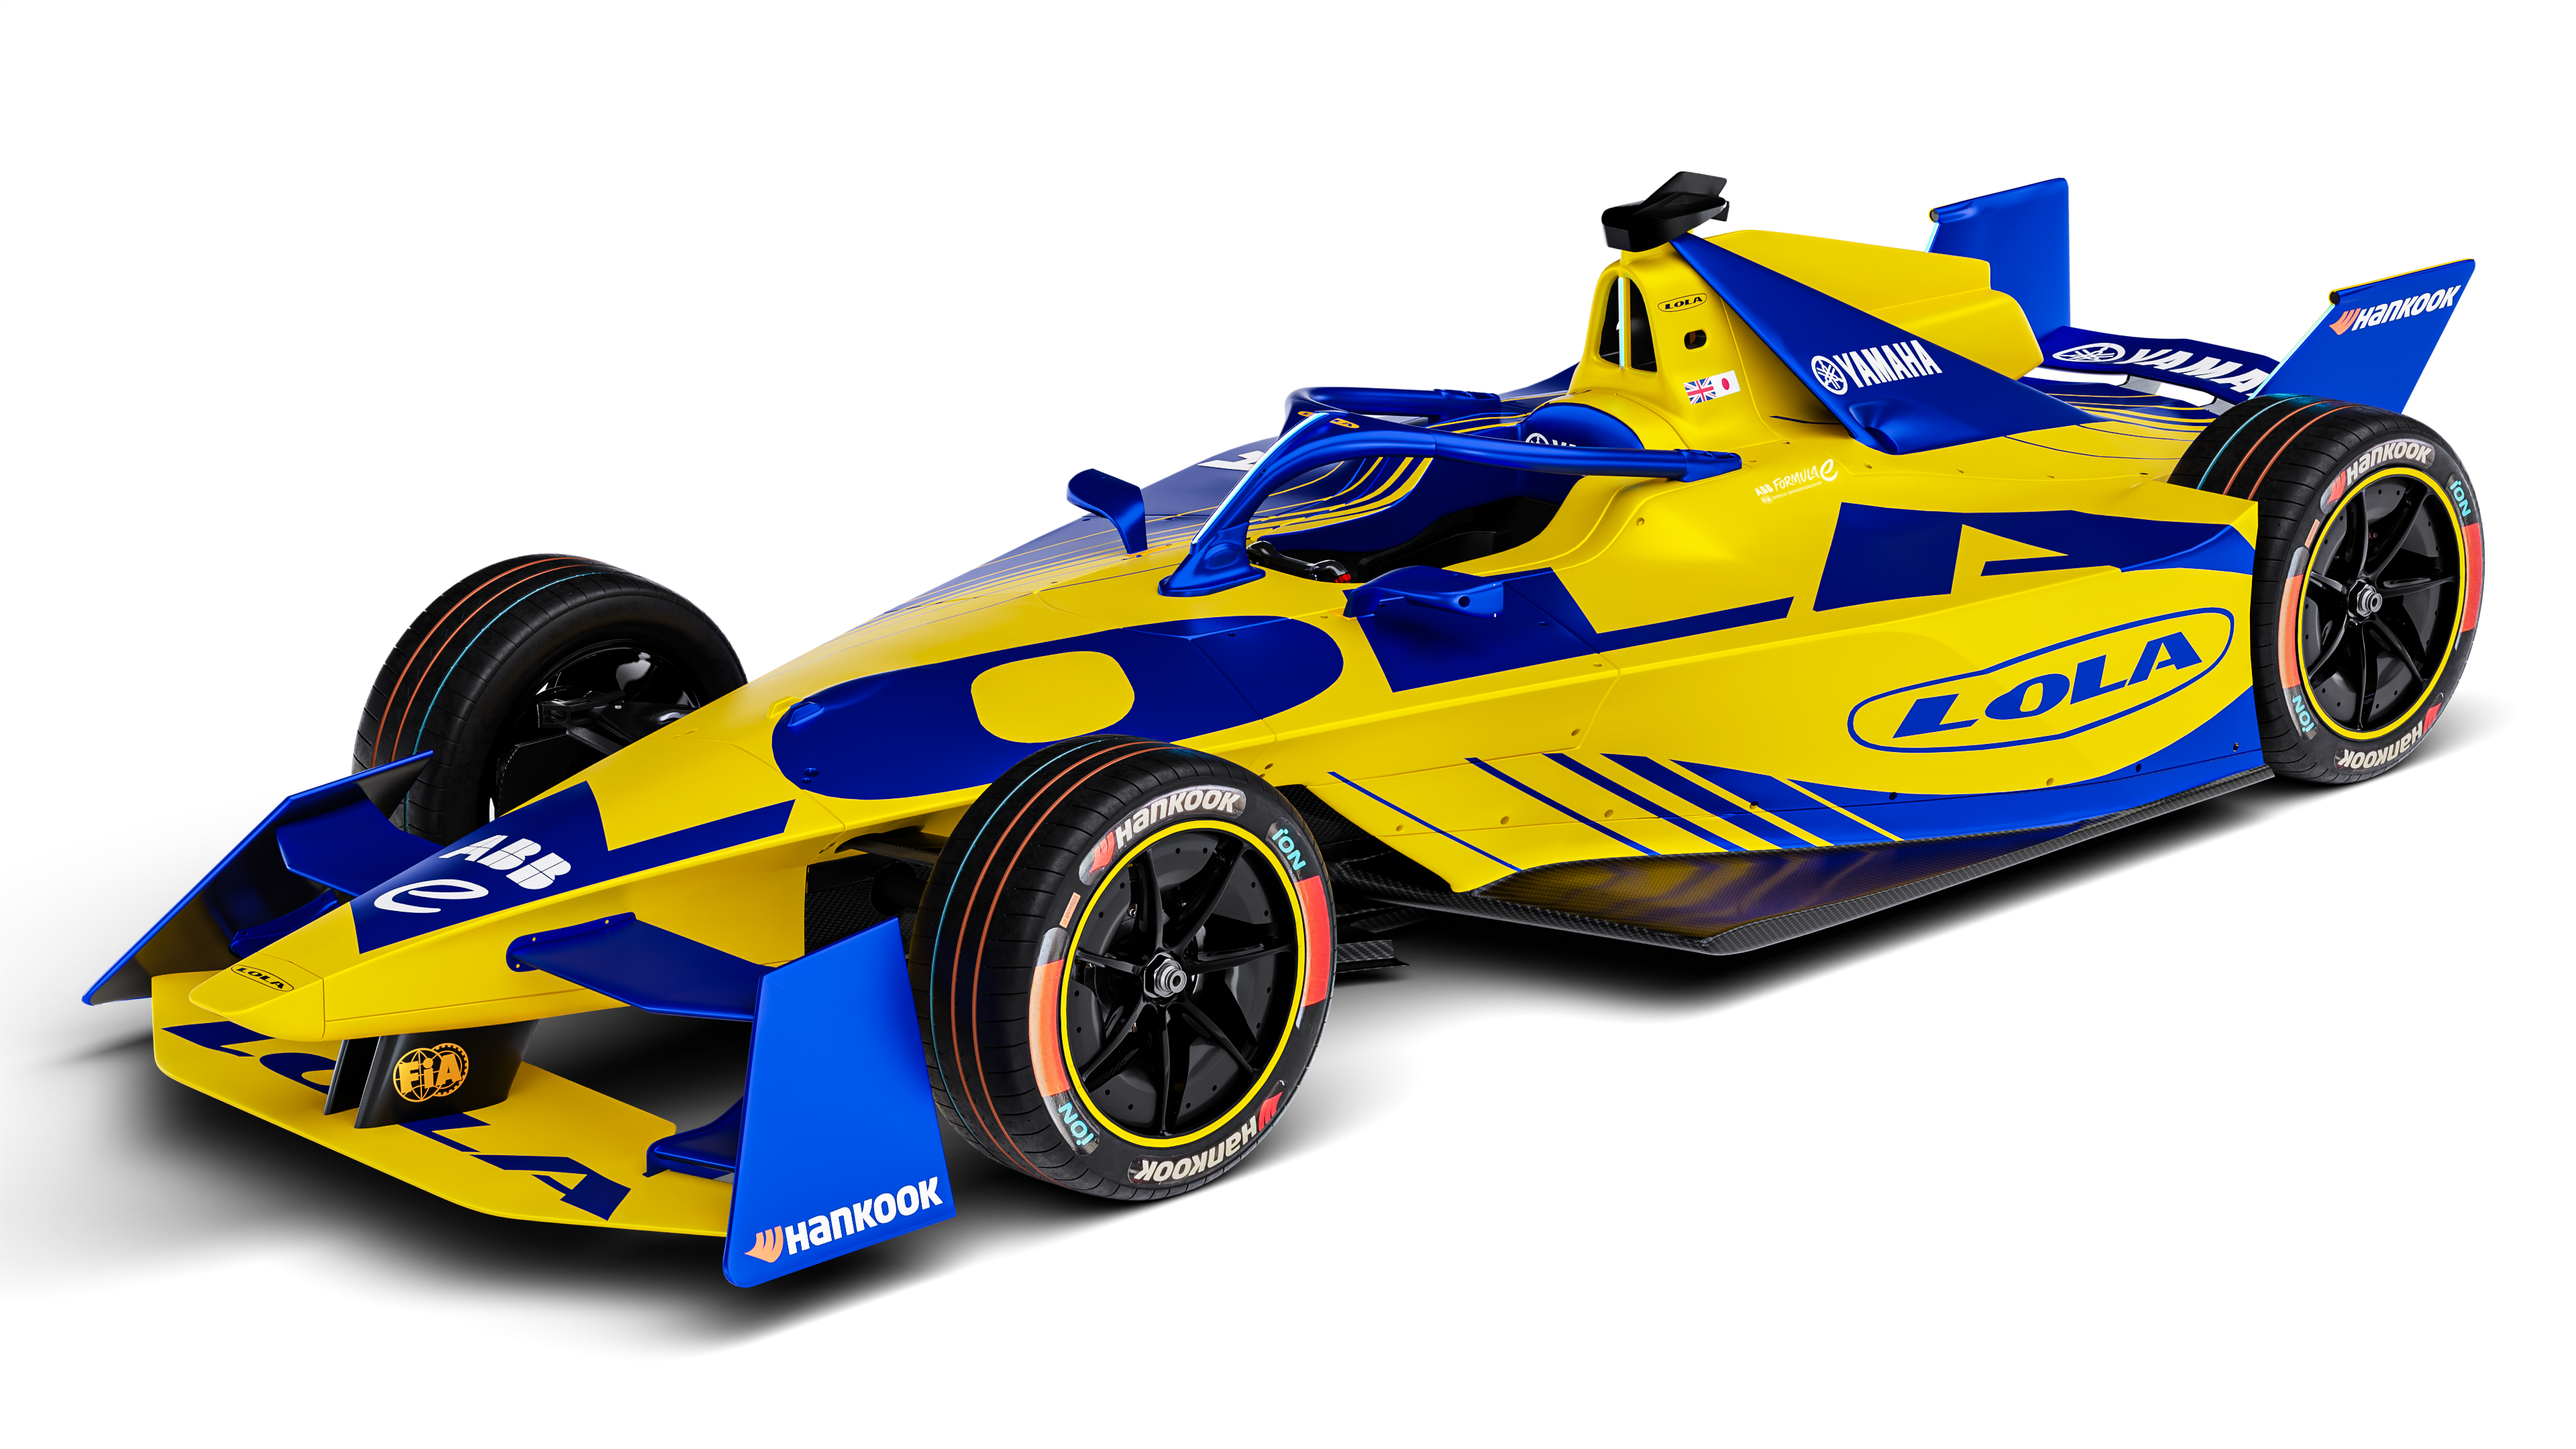 Lola Cars Joins Forces with Yamaha in Formula E Collaboration: Pioneering Electrified Motorsport Technology